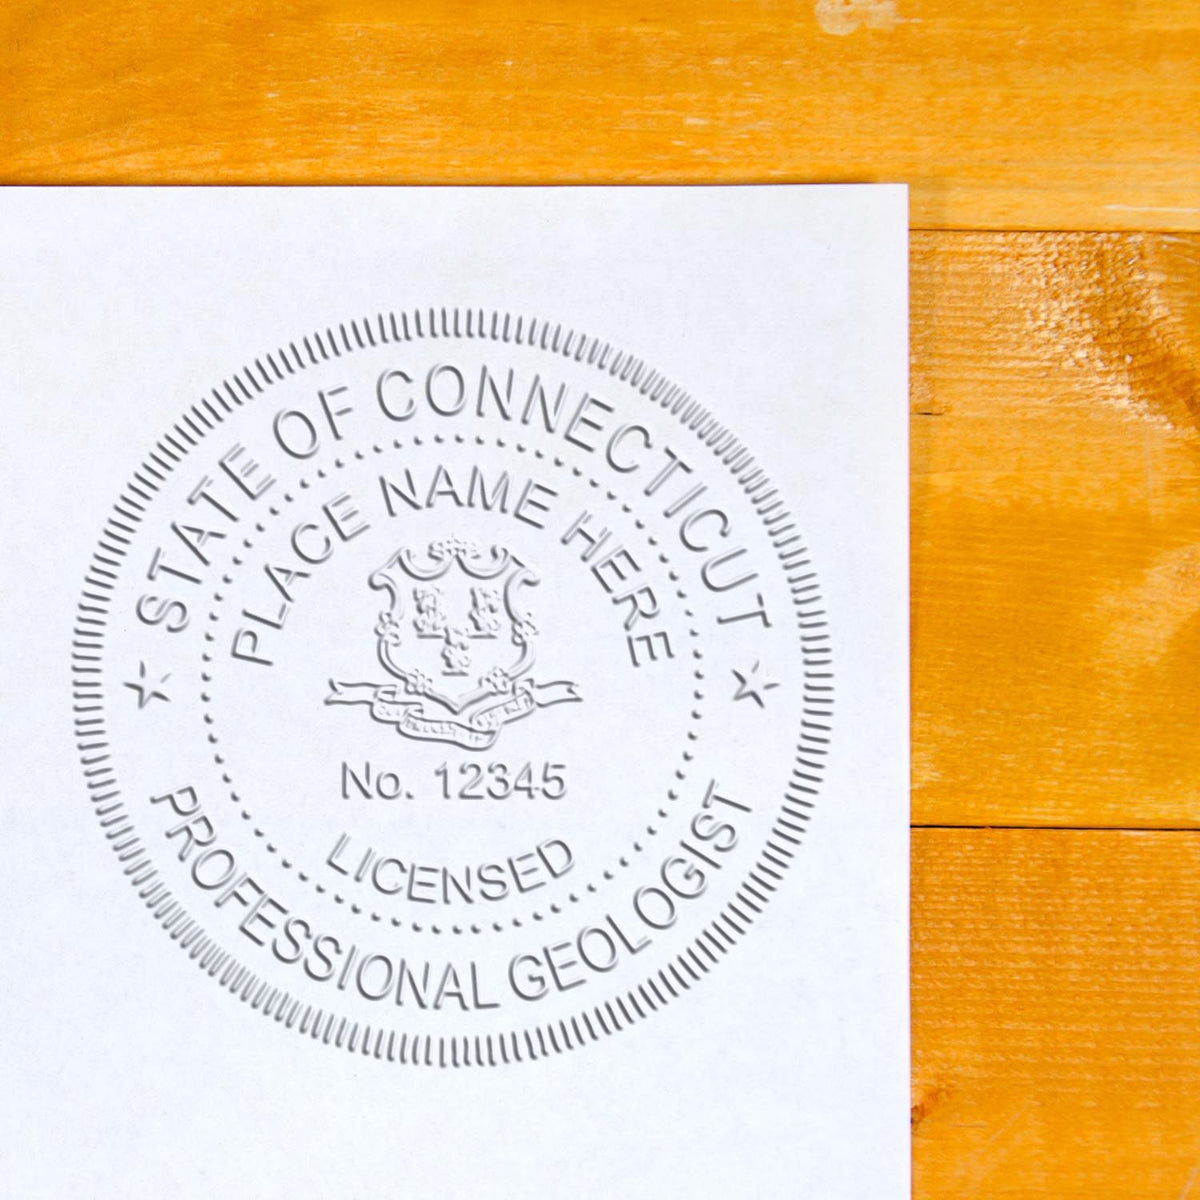 An in use photo of the Soft Connecticut Professional Geologist Seal showing a sample imprint on a cardstock